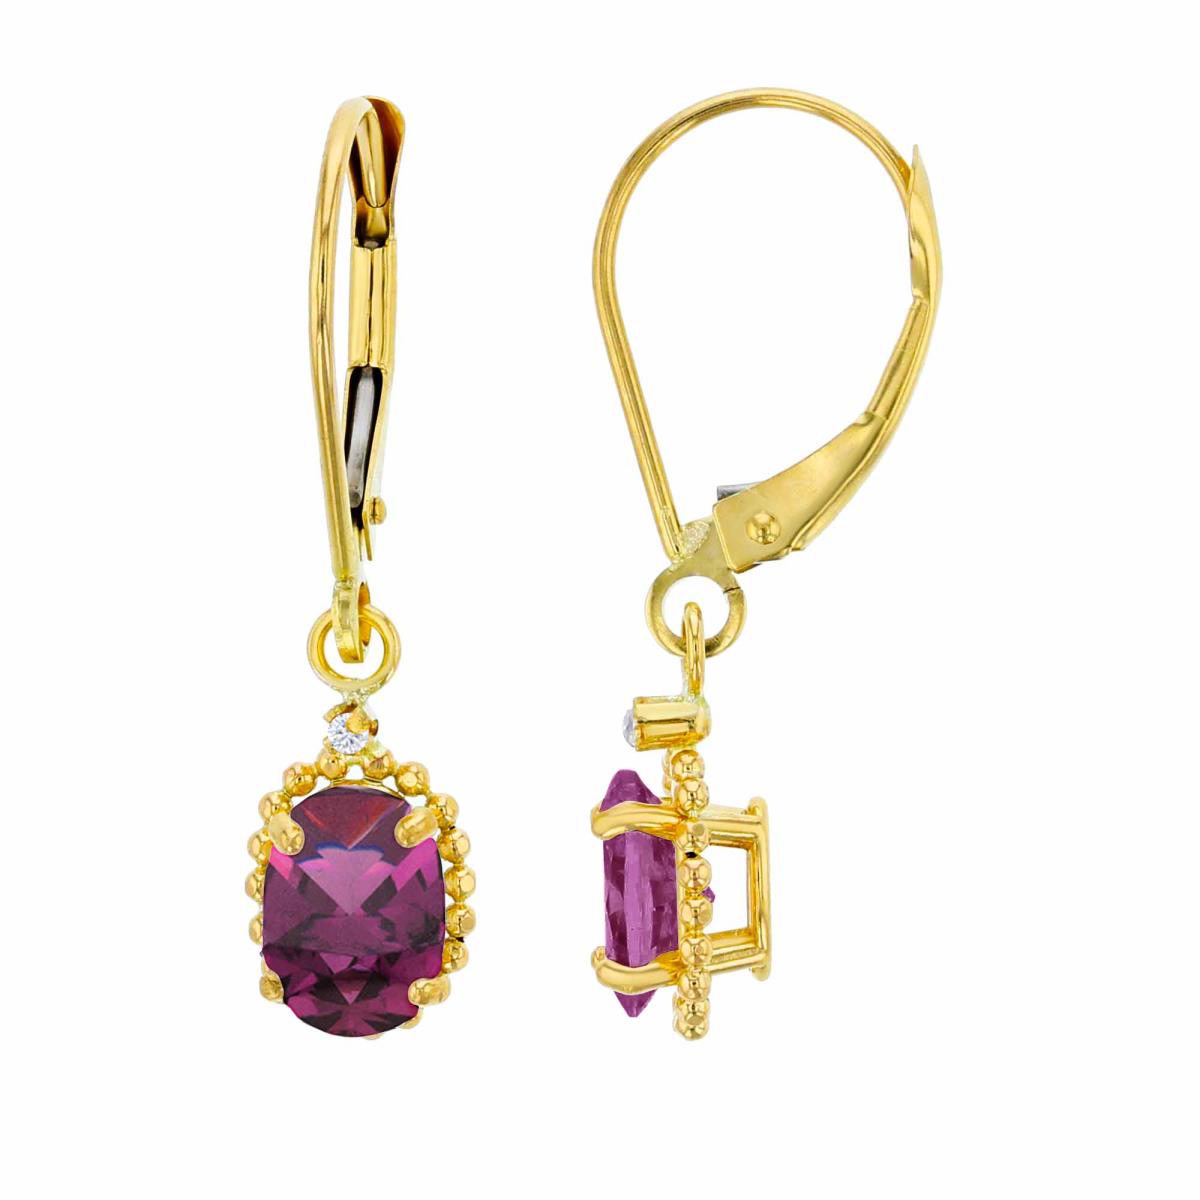 10K Yellow Gold 1.25mm Rd Created White Sapphire & 6x4mm Ov Rhodolite Bead Frame Drop Lever-Back Earring